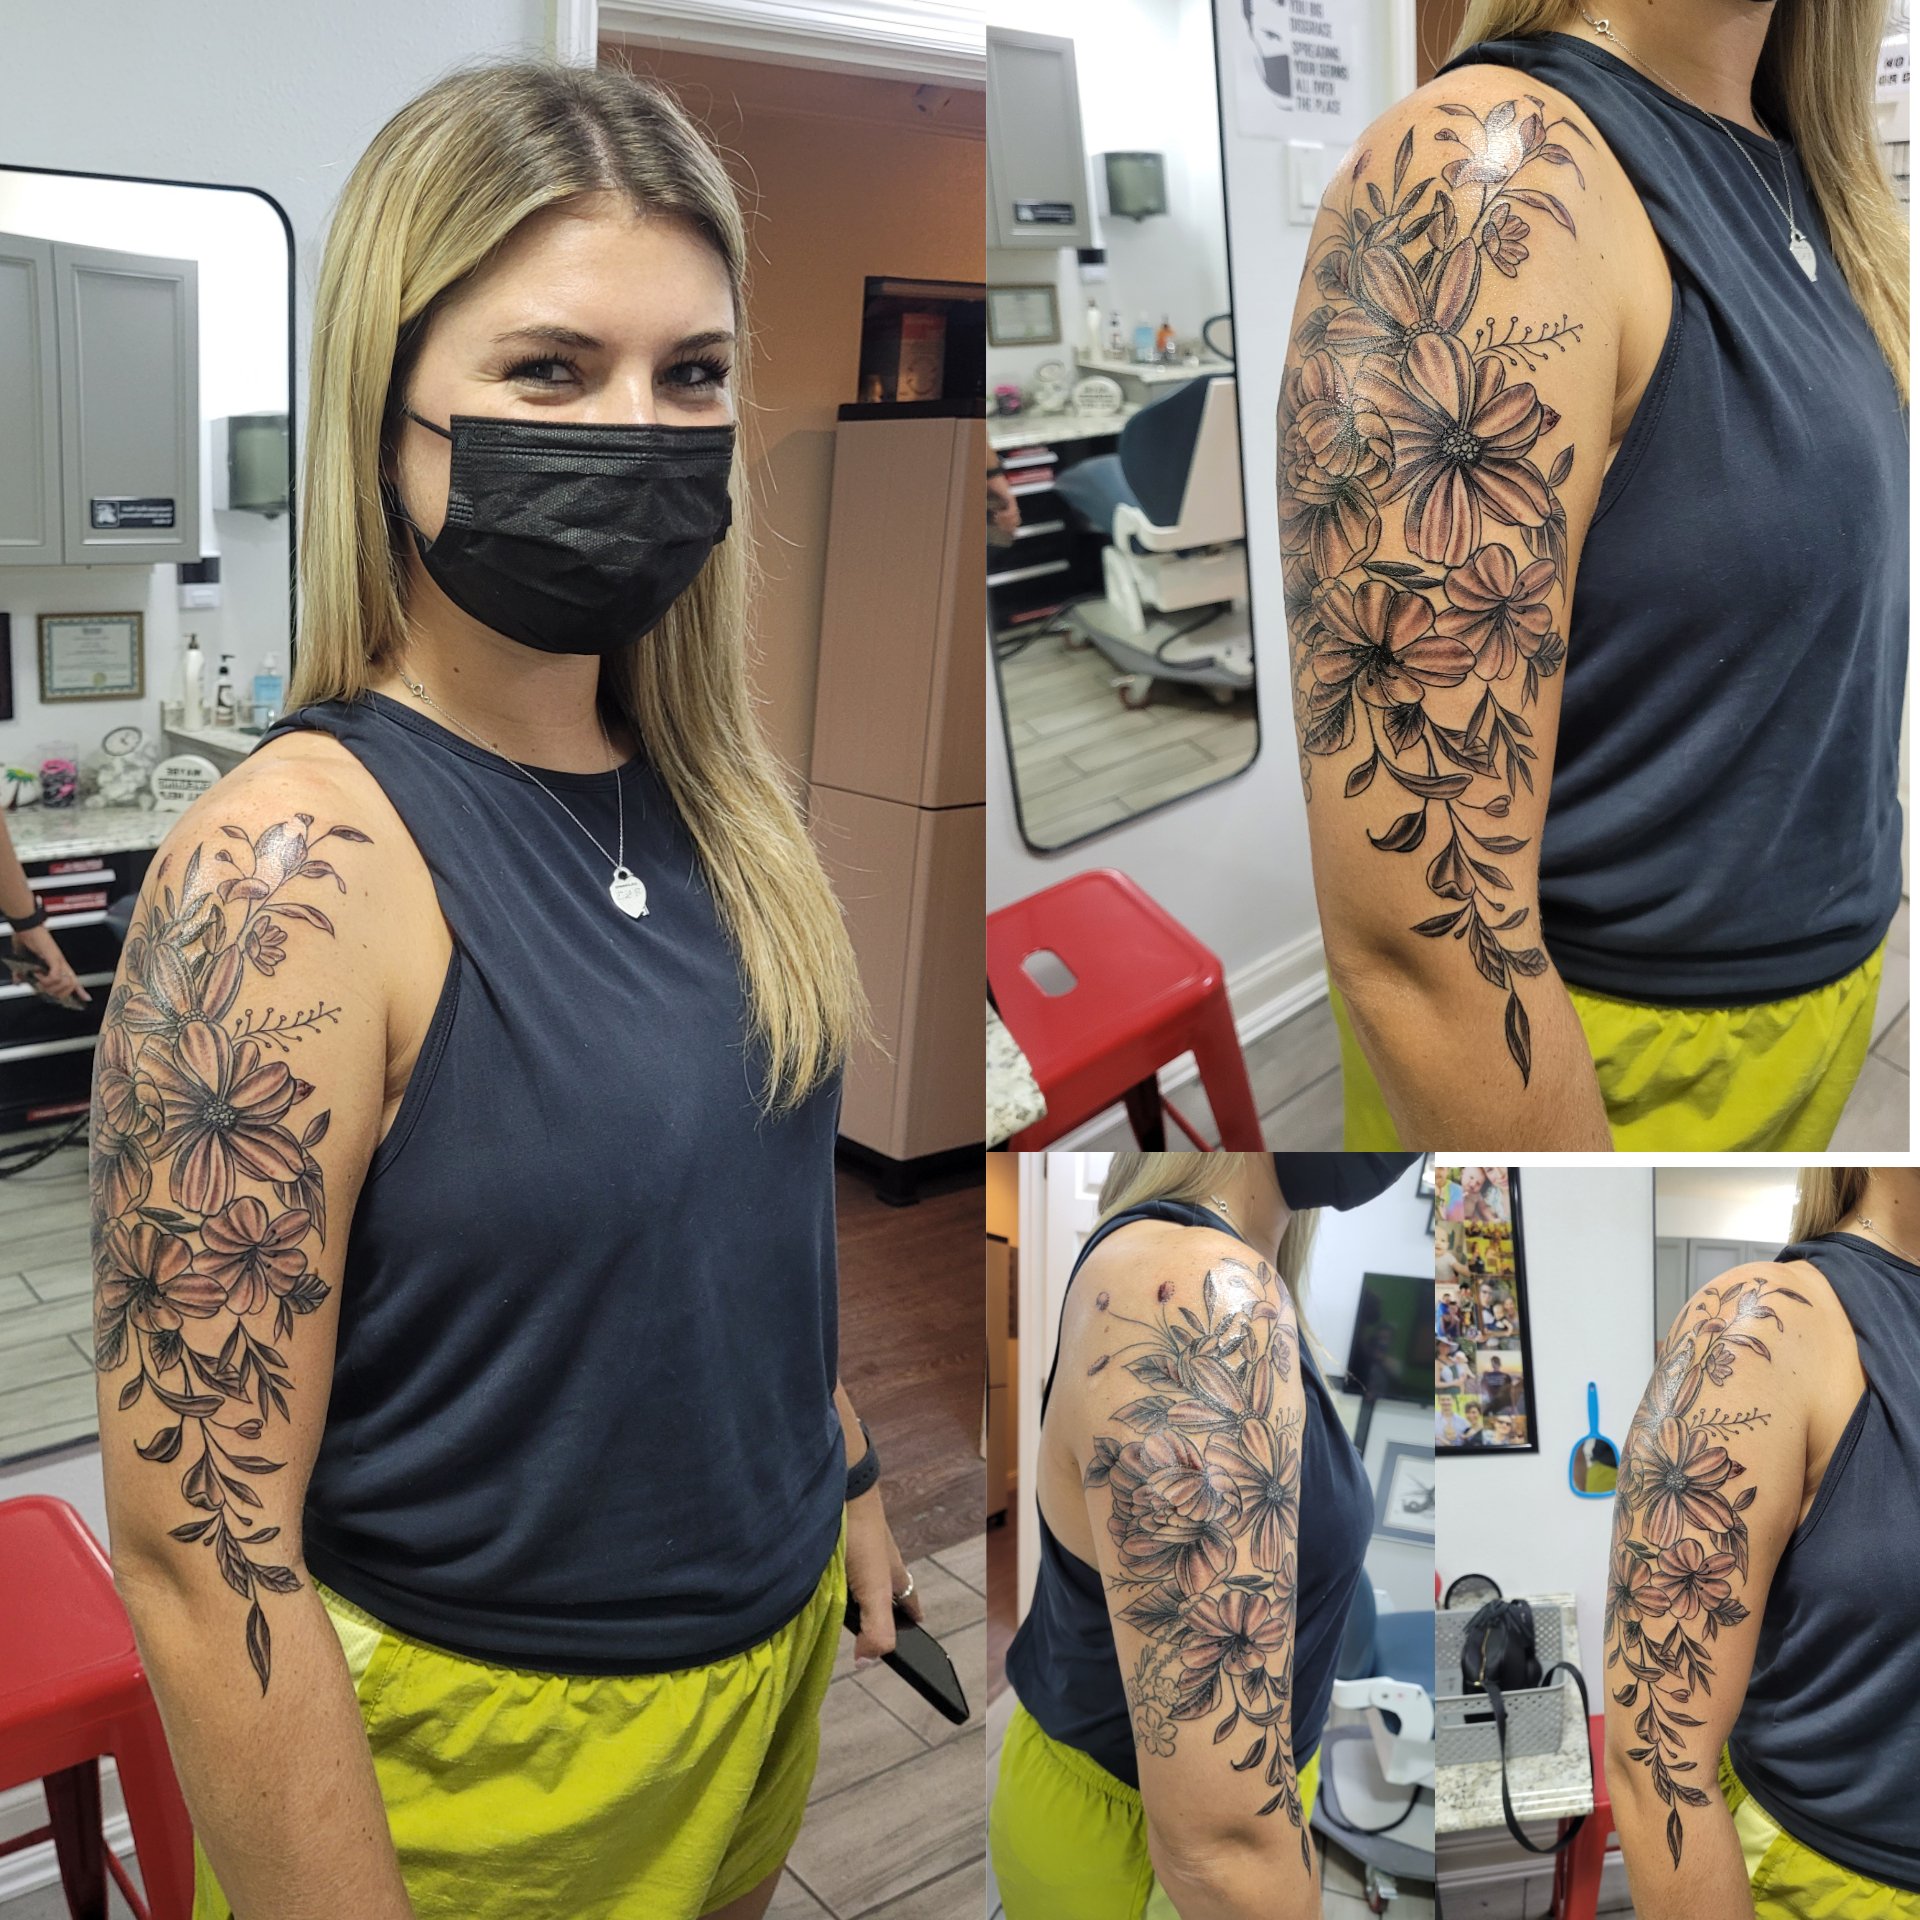 20 Religious Half Sleeve Tattoos You Should Check Out  TattooTab